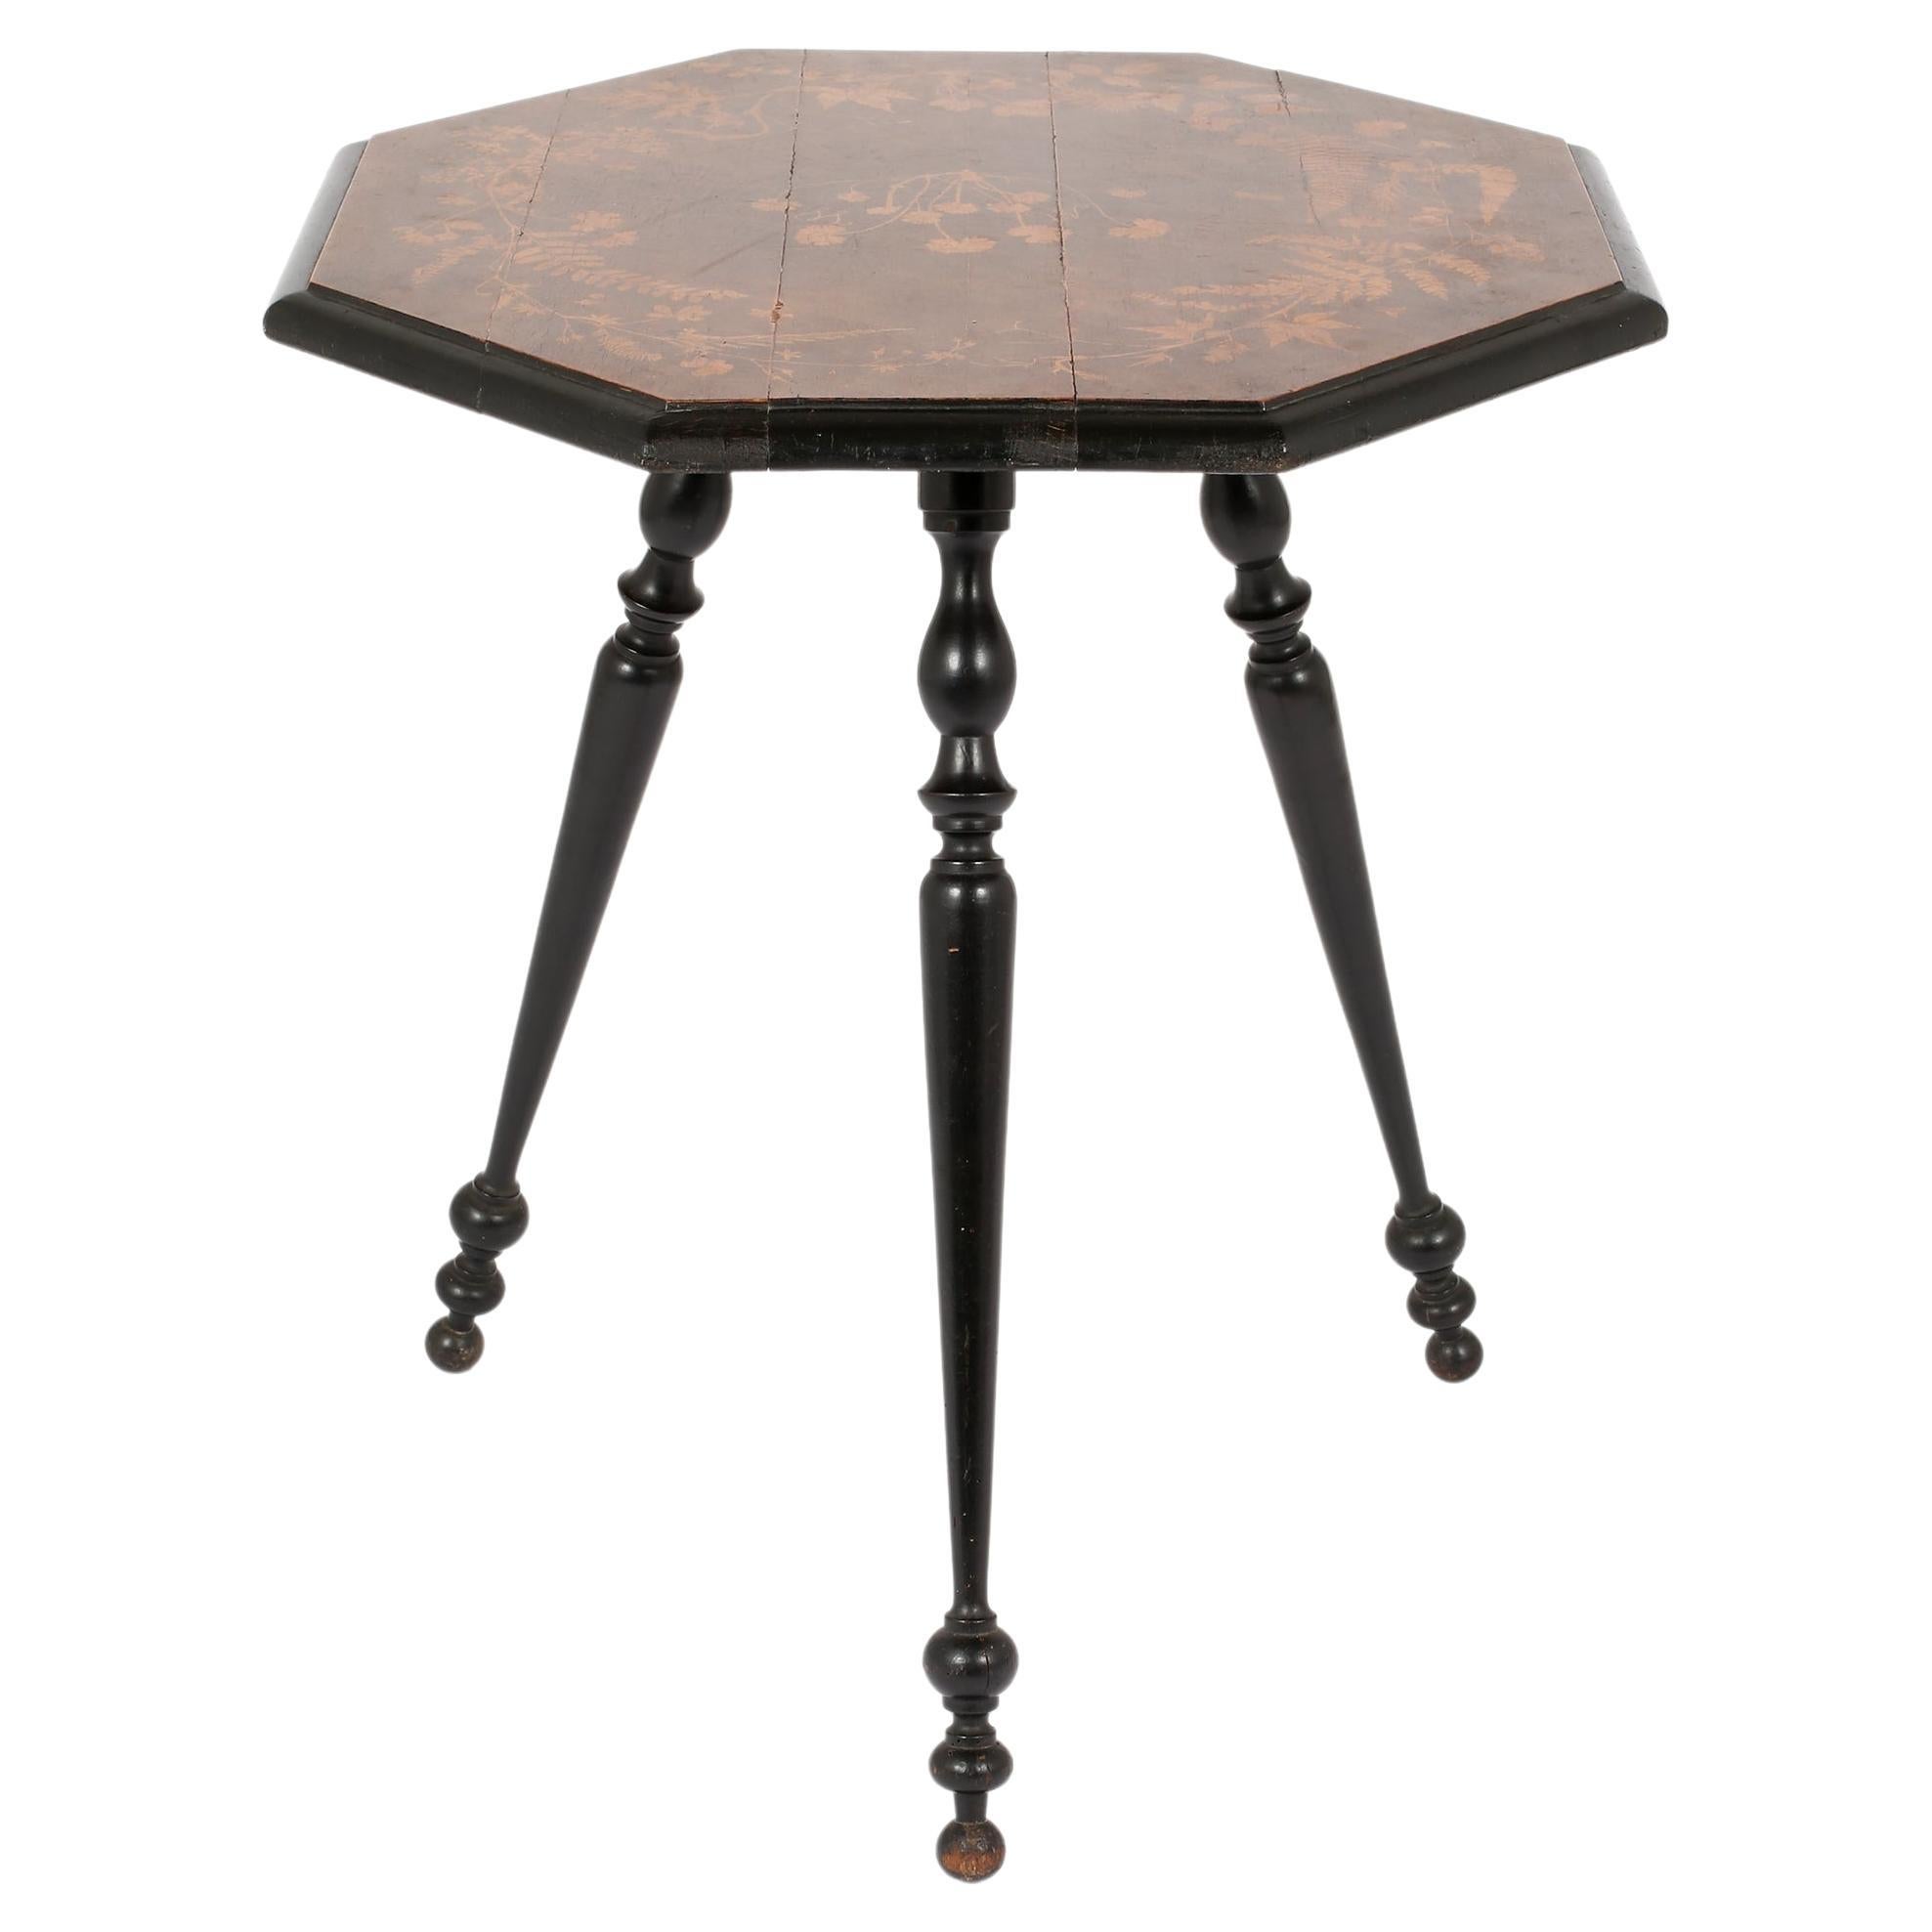 Octagonal Ebonised Marquetry Occasional Table, French c. 1900